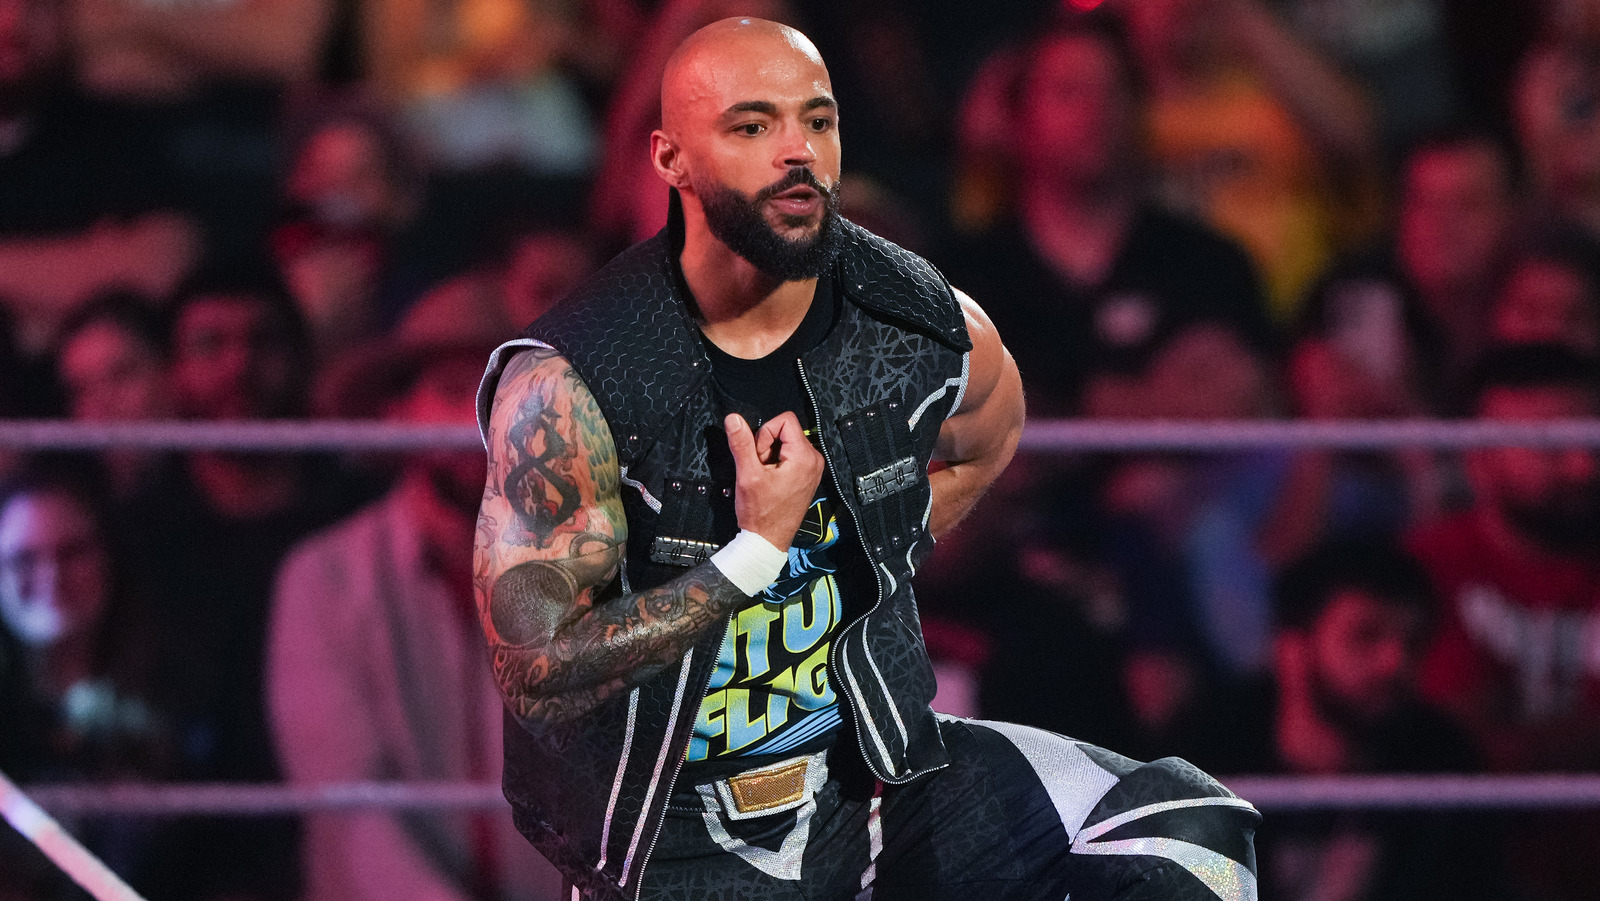 Dave Meltzer provides a backstage update on the status of Ricochet’s contract with WWE